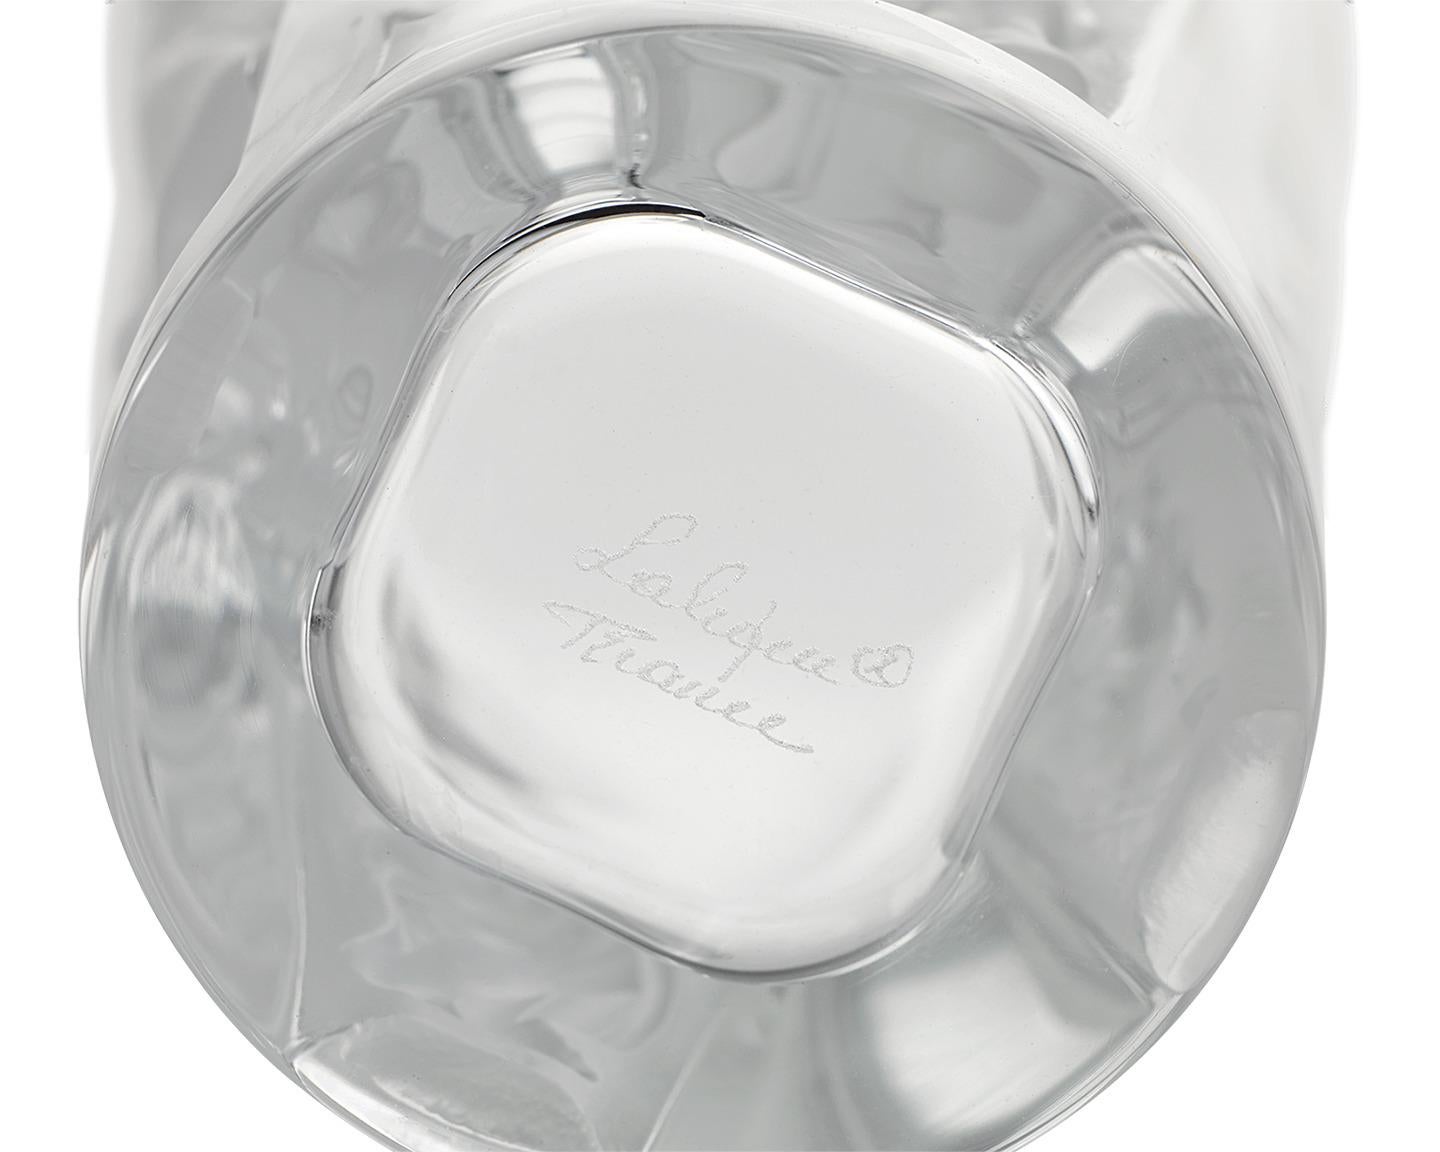 Other Muses Highball Glasses by Lalique